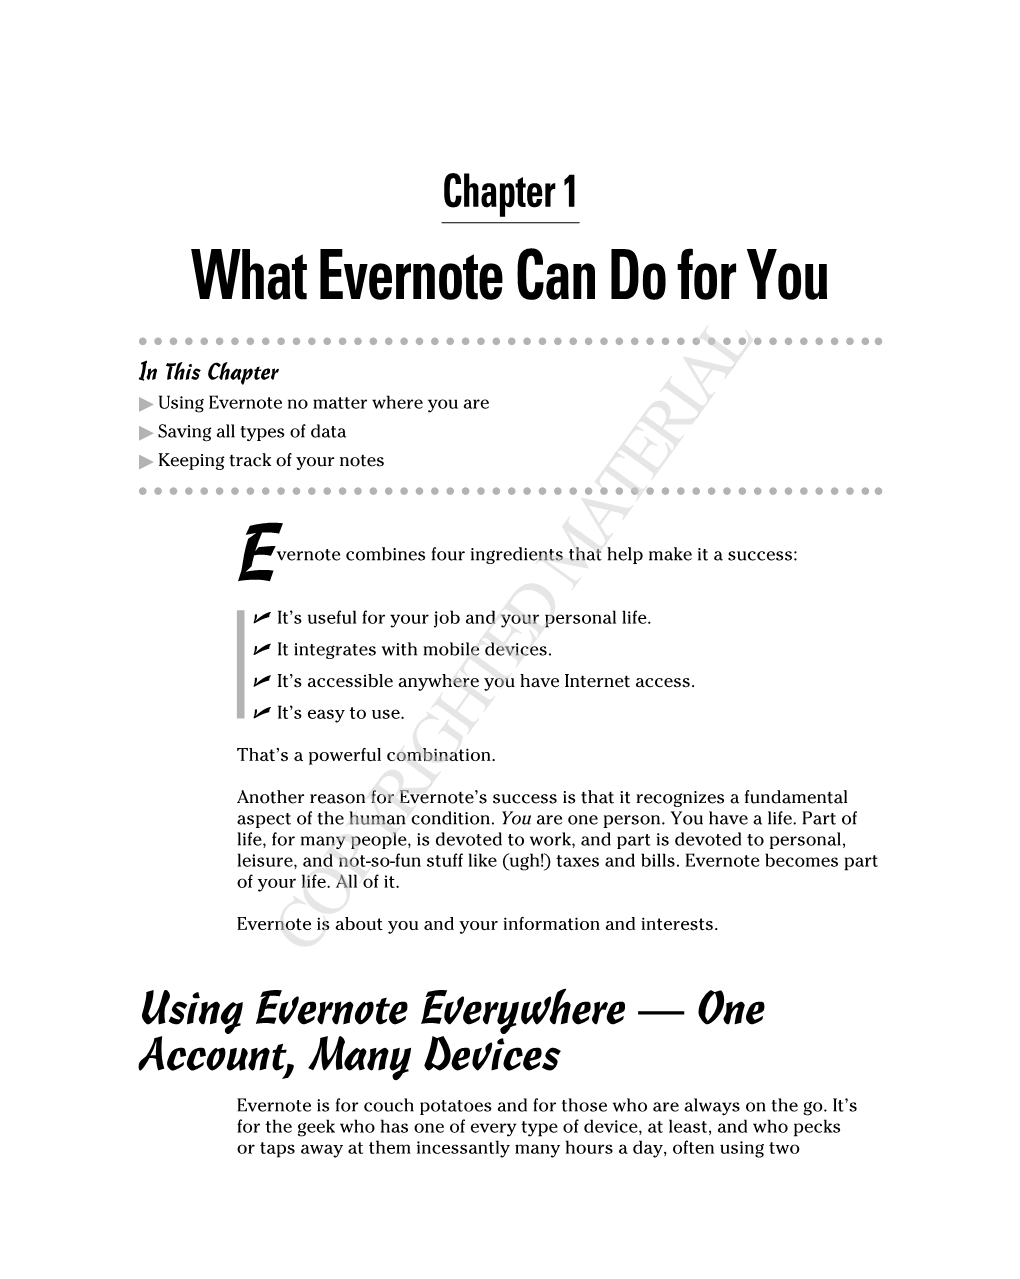 What Evernote Can Do for You